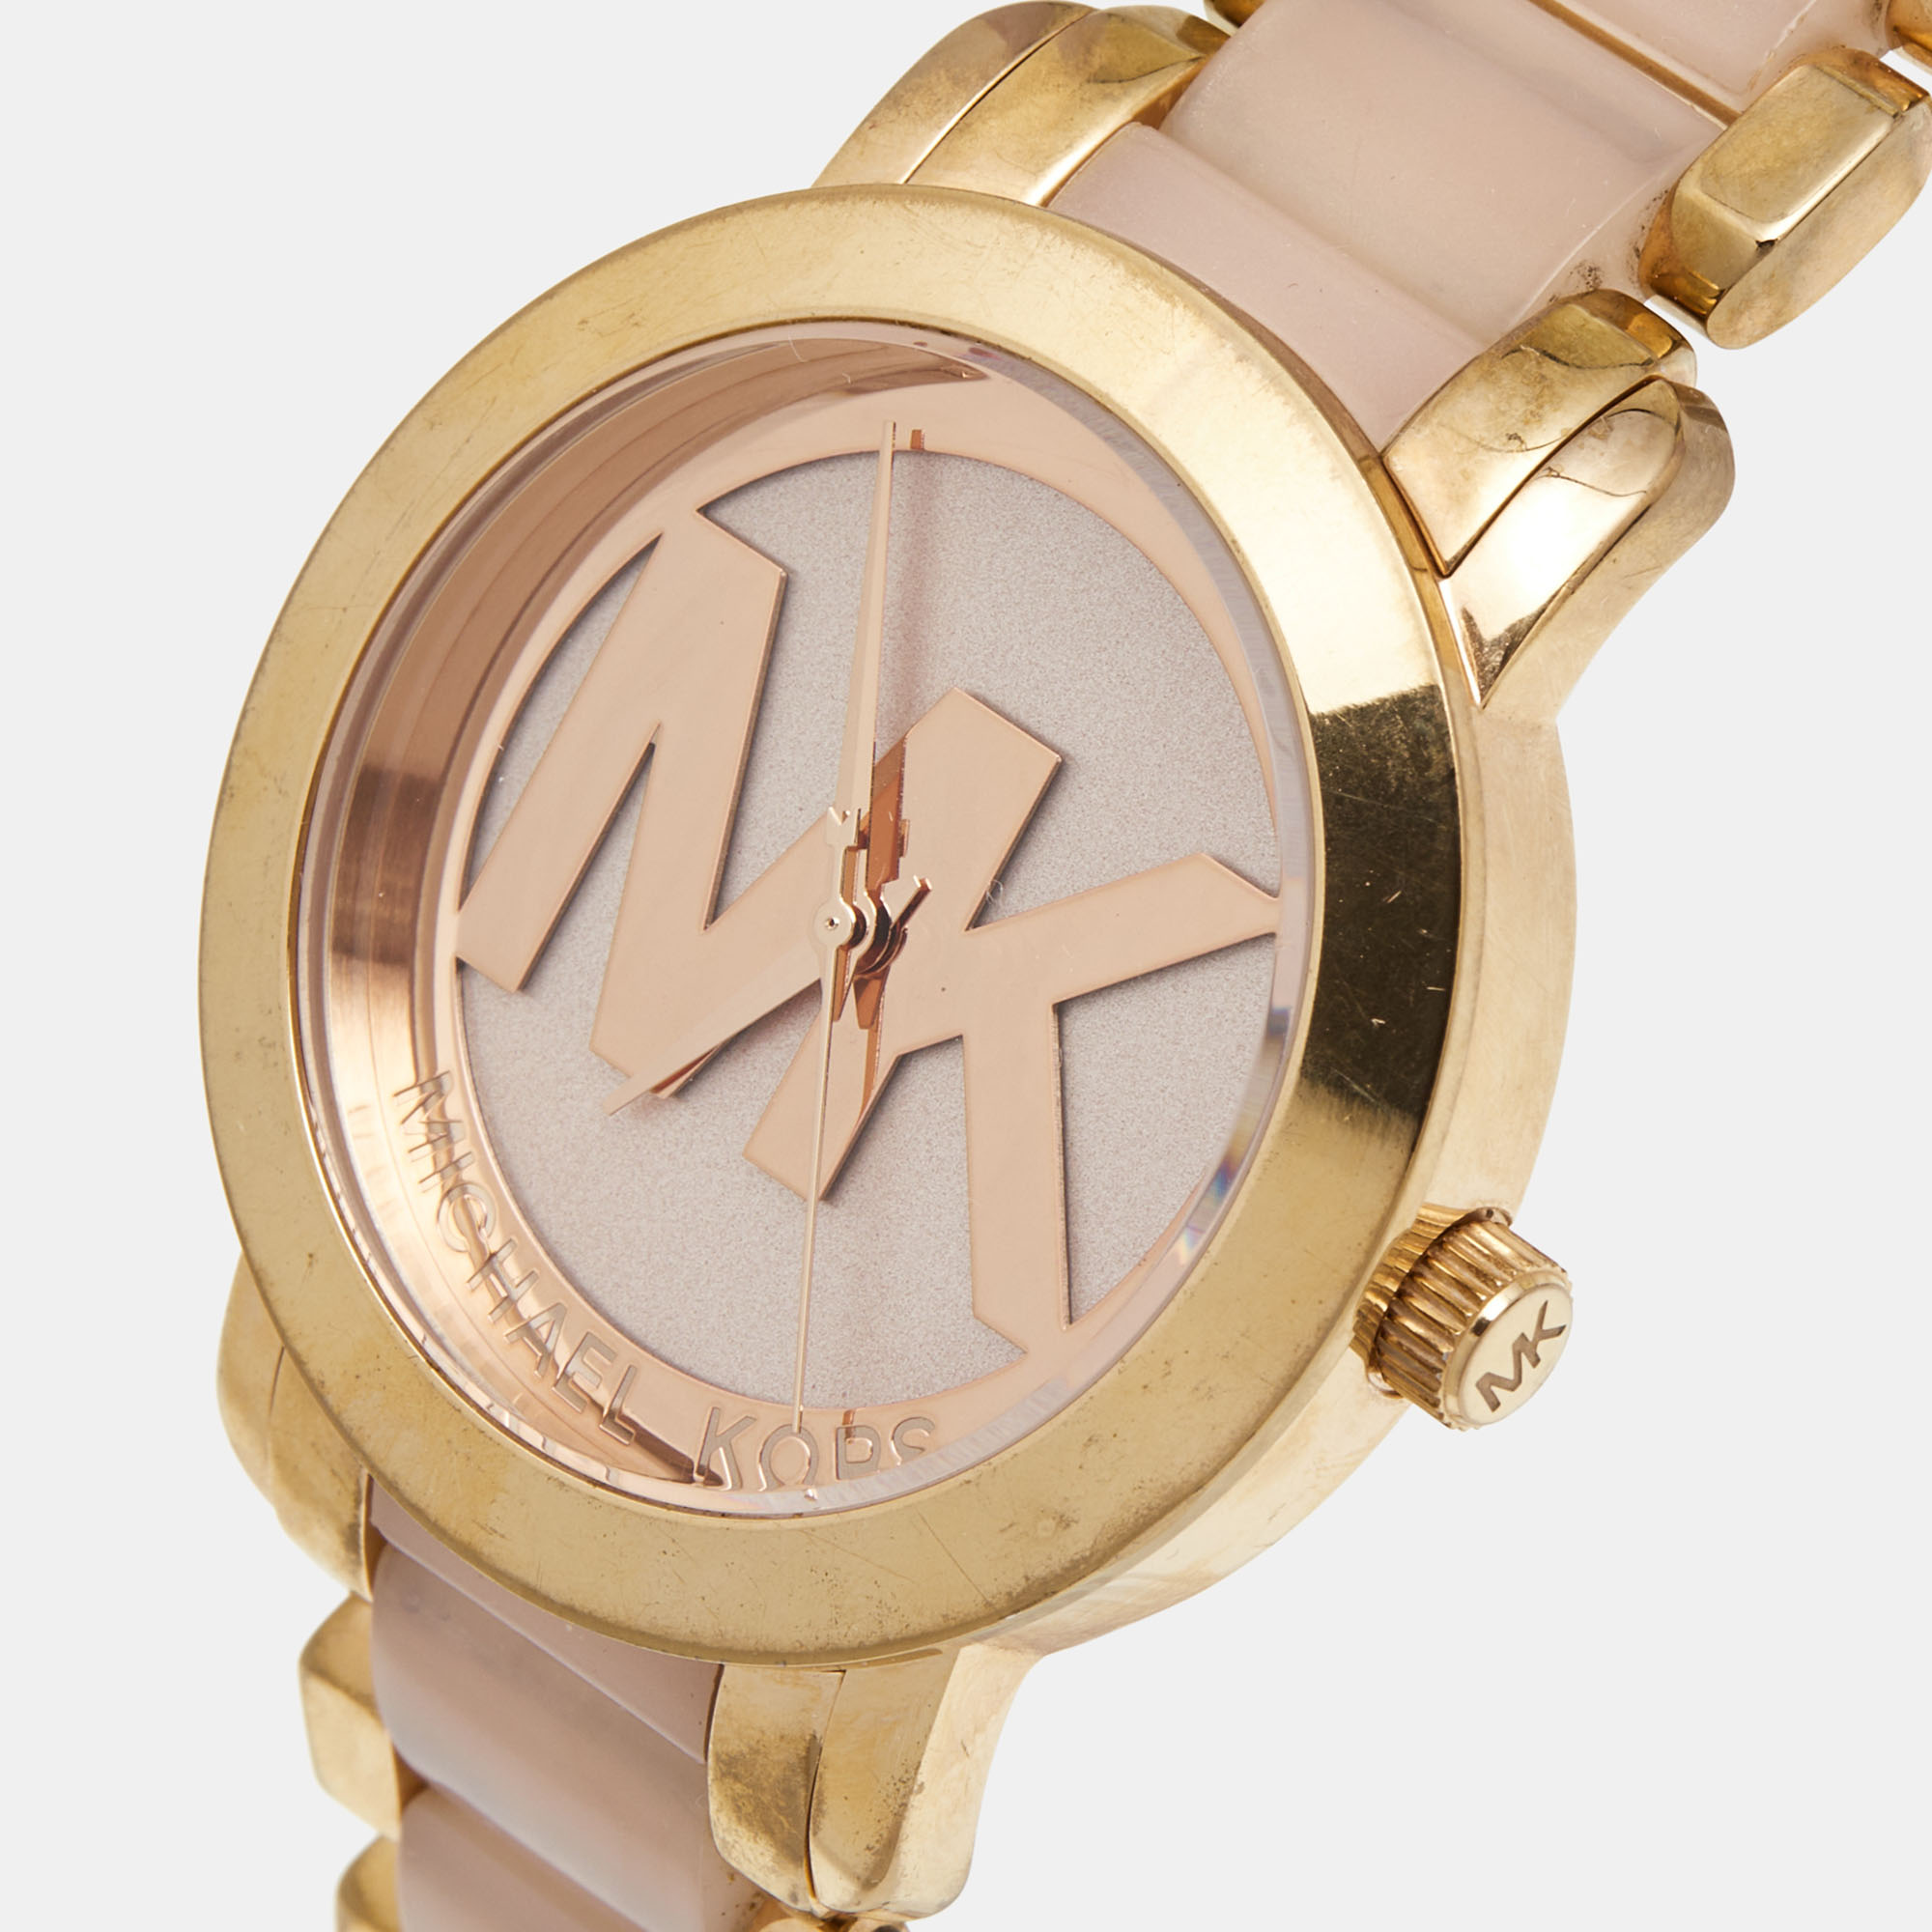 

Michael Kors Champagne Rose Gold Plated Stainless Steel Acetate Runway MK4324 Women's Wristwatch